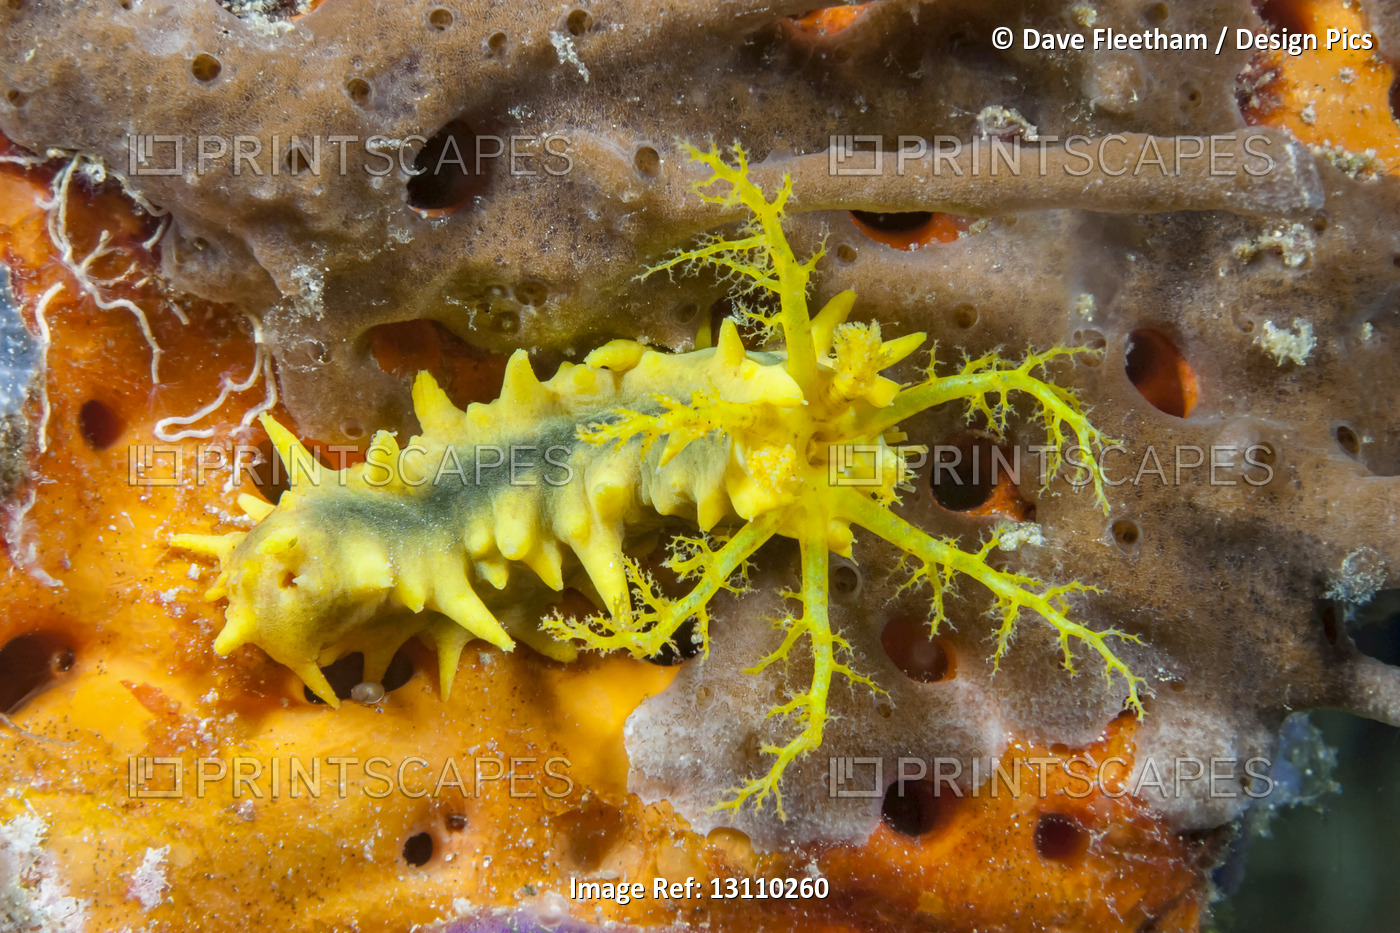 Yellow Sea Cucumber (Colochirus robustus) with feeding tentacles extended; ...